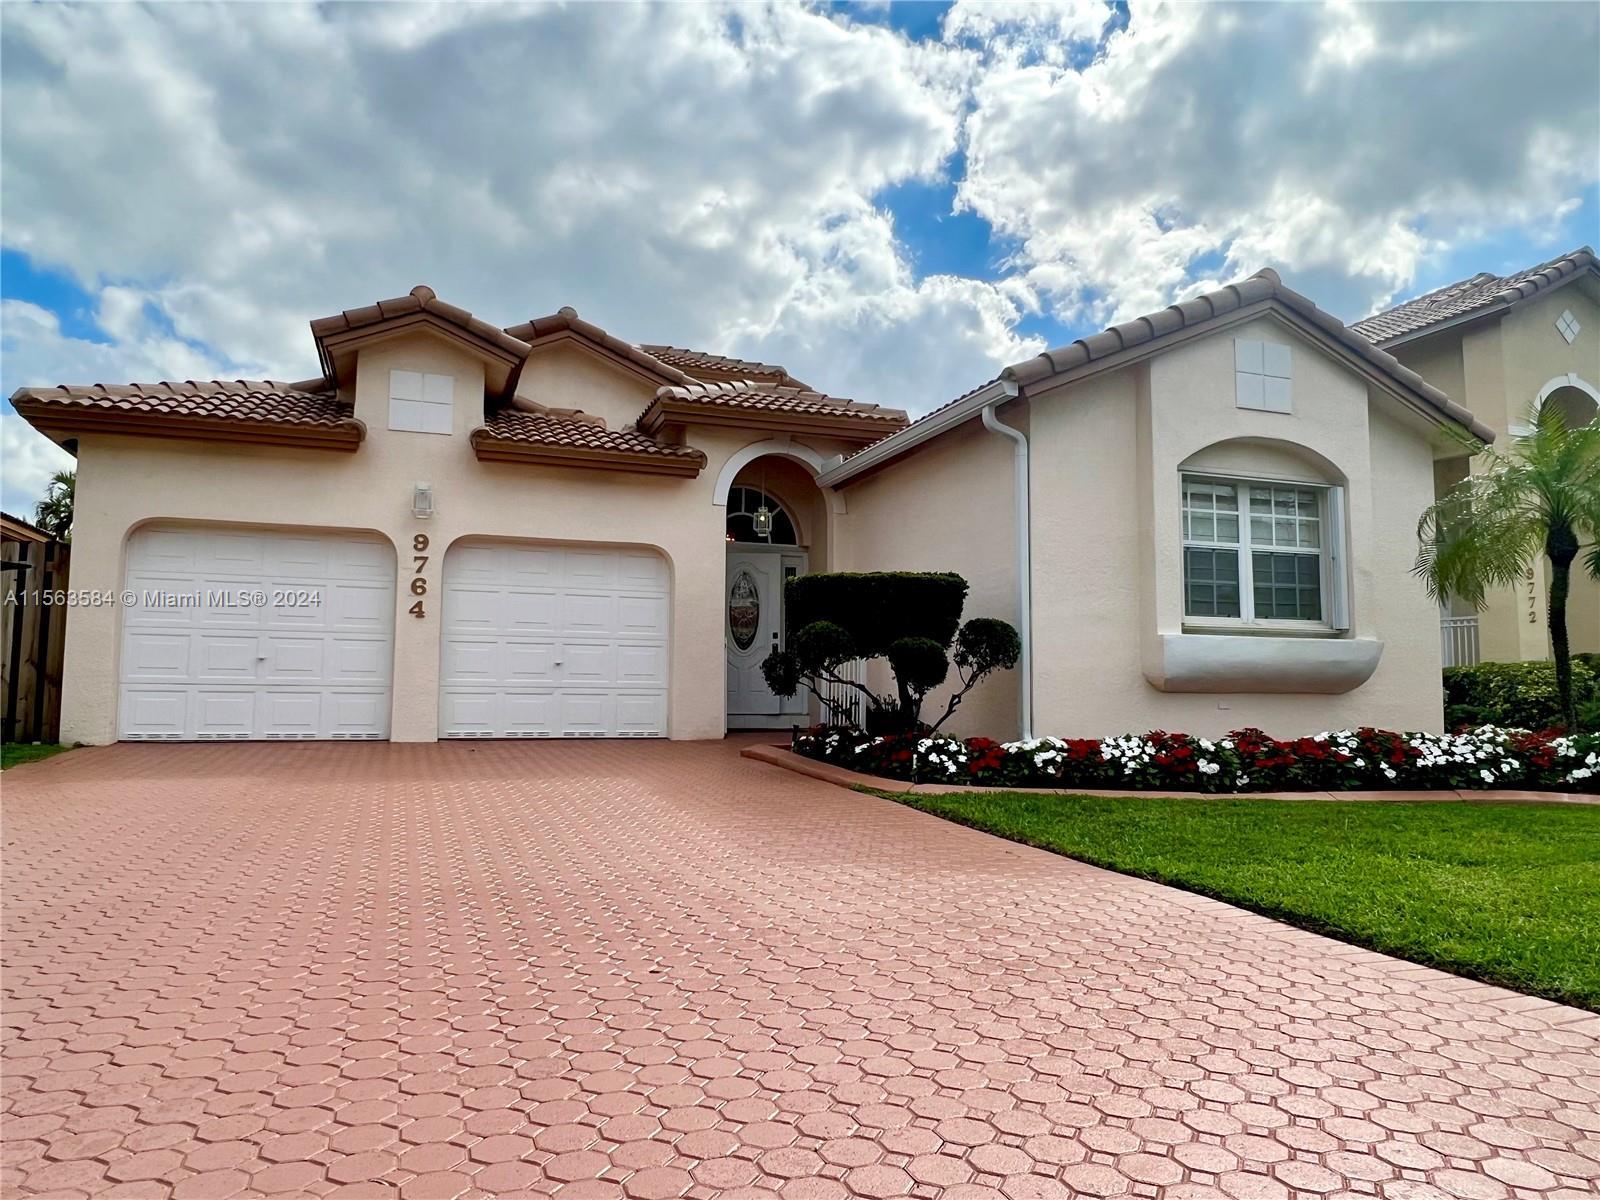 Photo of 9764 NW 32nd St in Doral, FL